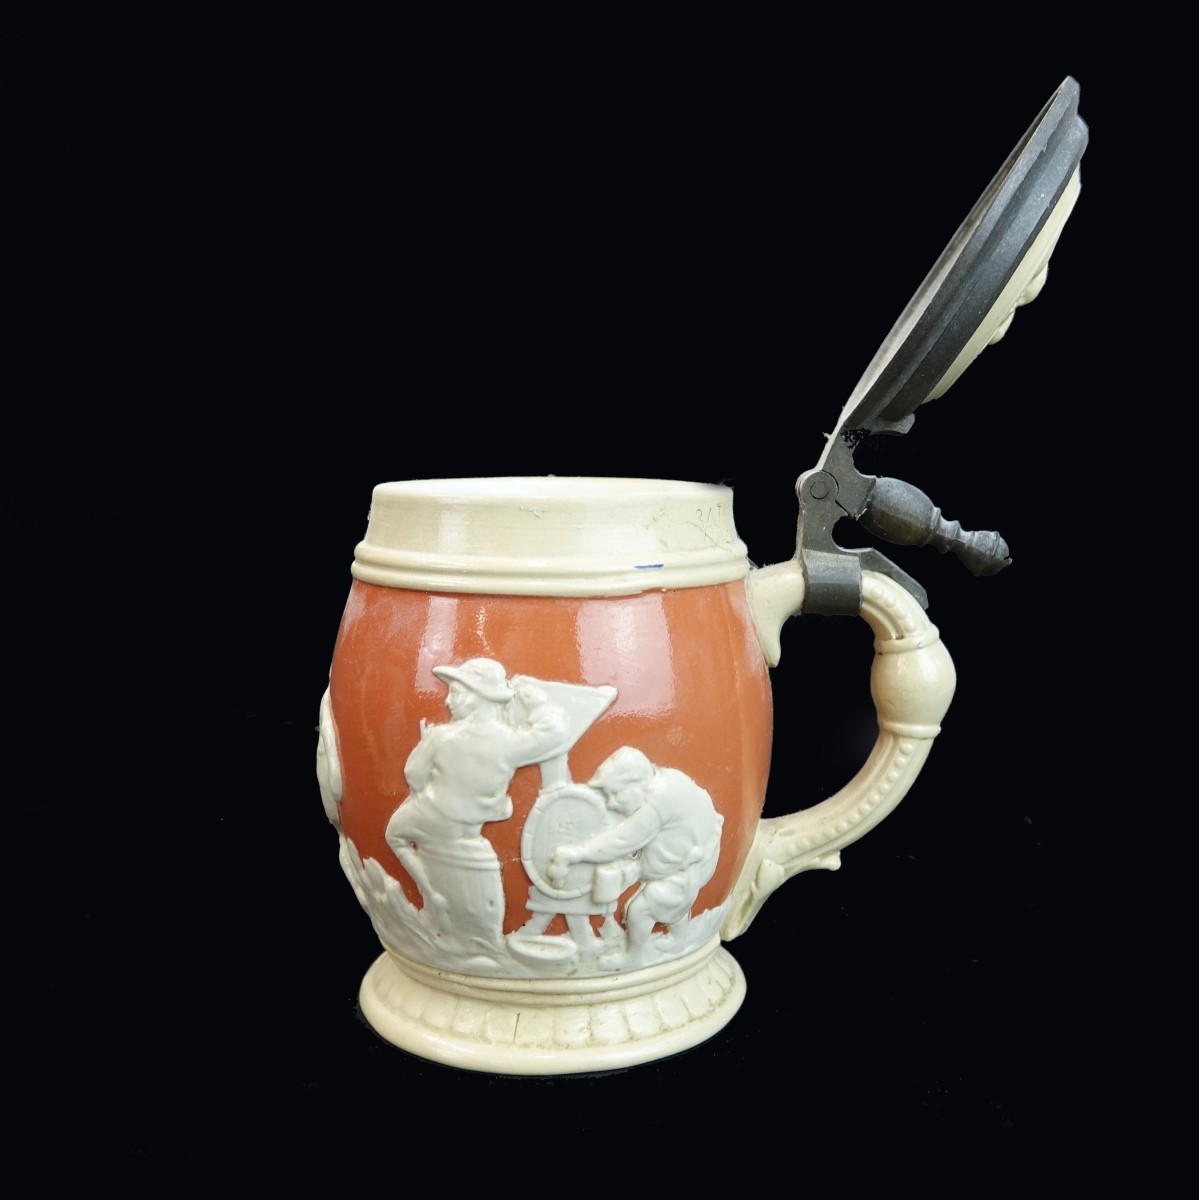 Seven (7) Pc Mettlach Beer Pitcher and Steins